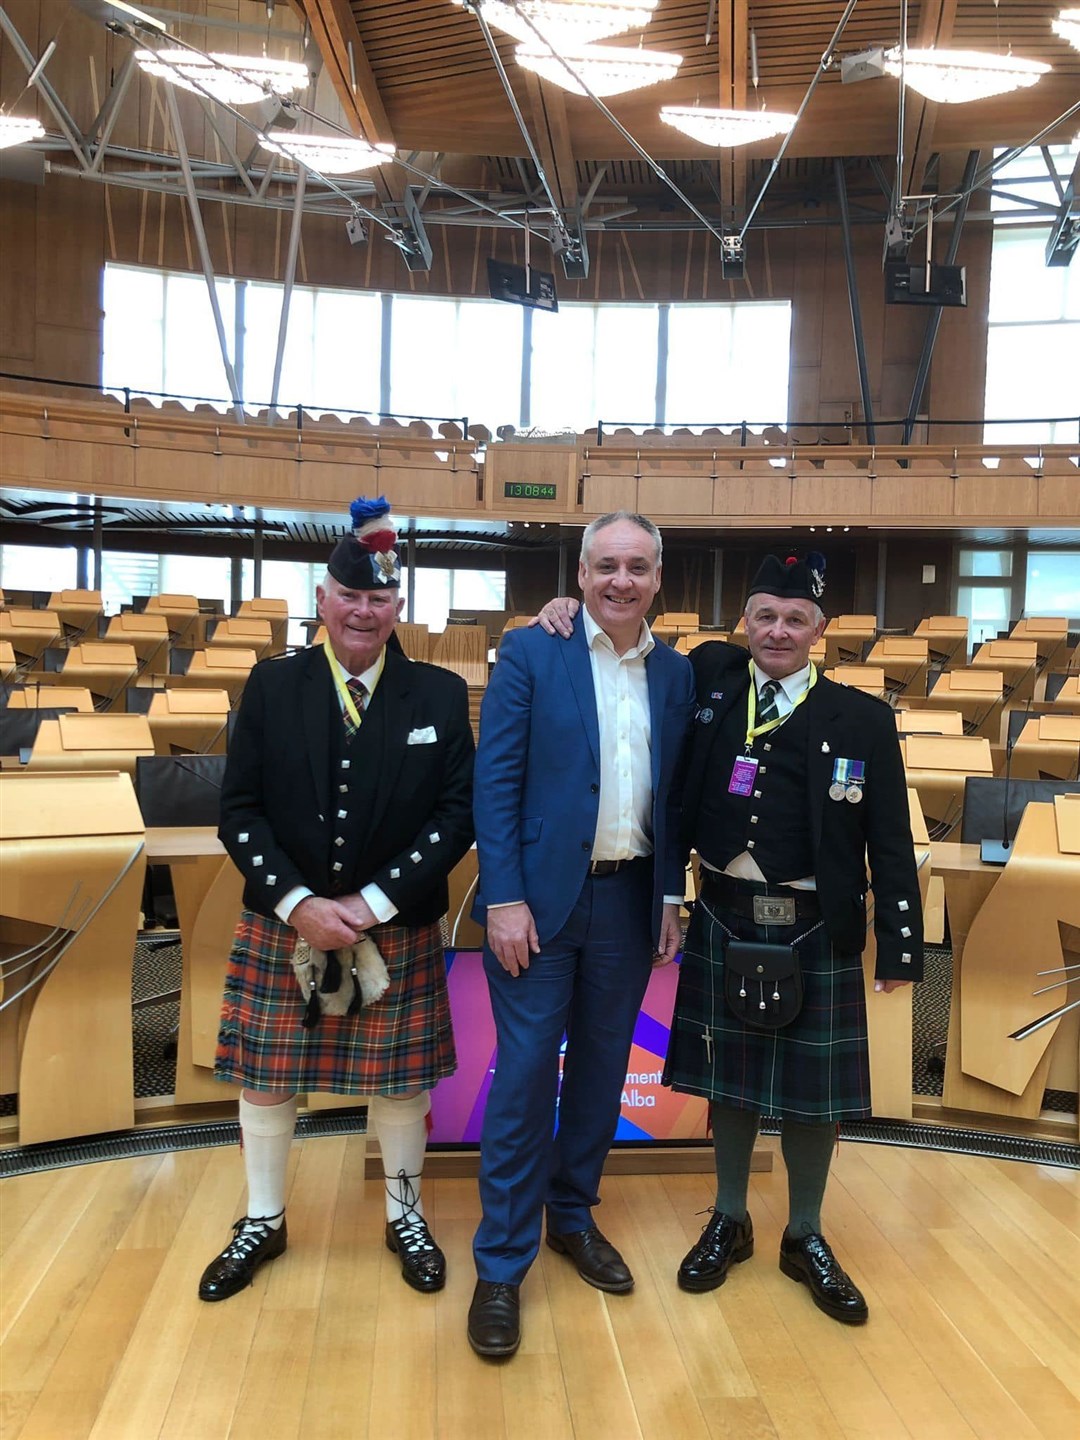 Mike Christie (left) and Geordie Ross with Richard Lochhead in the Scottish Parliament.